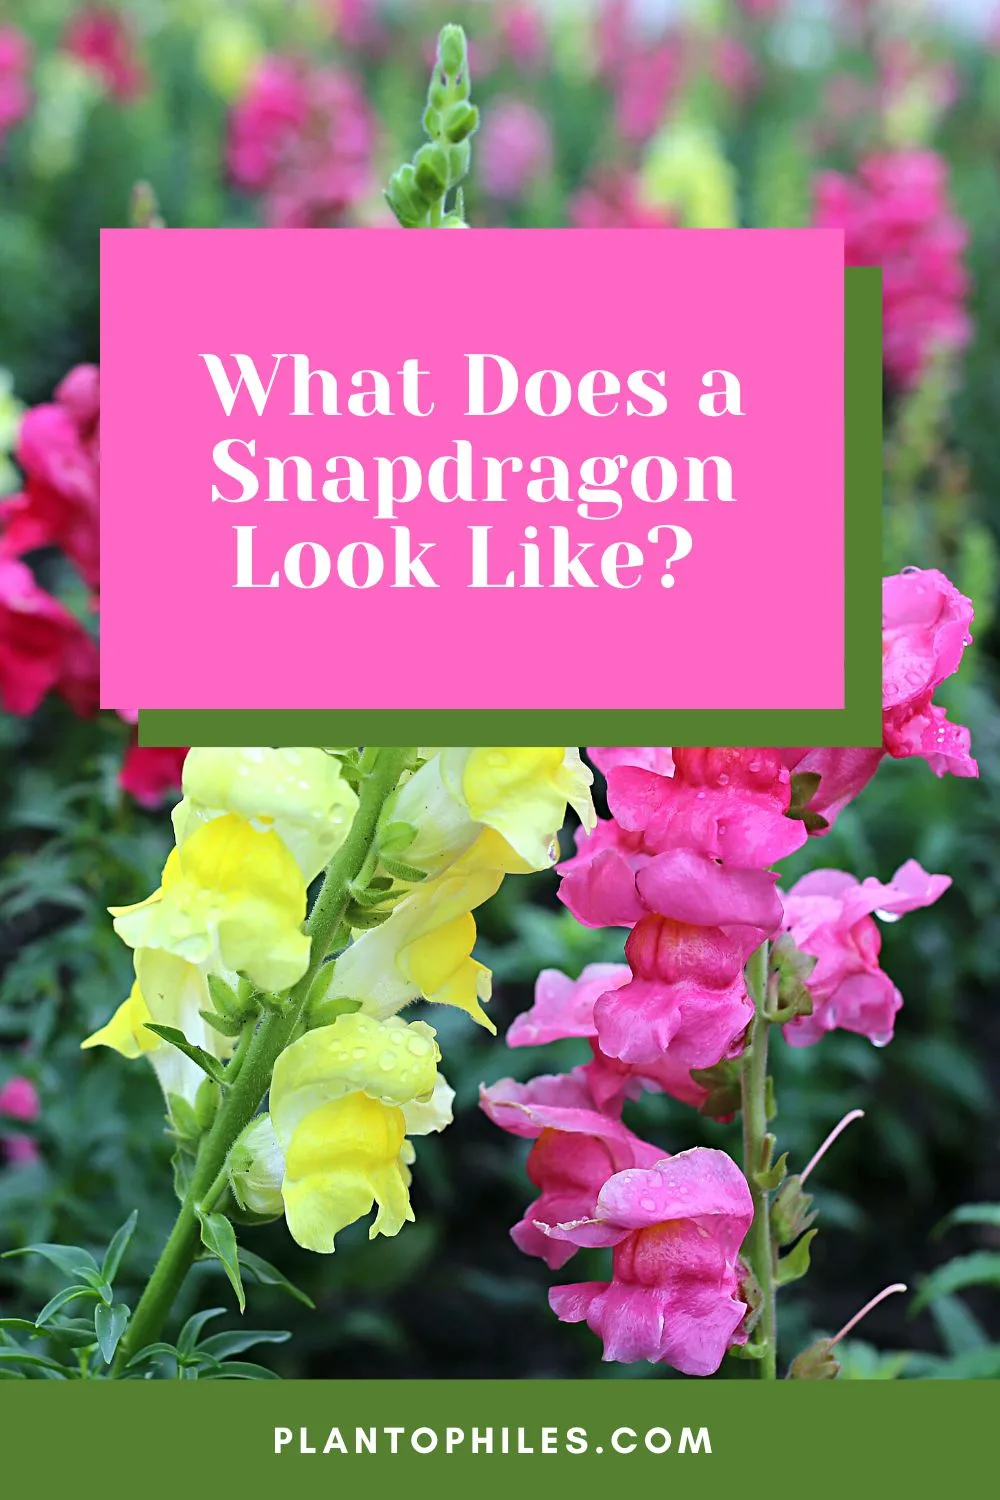 What Does a Snapdragon Look Like?